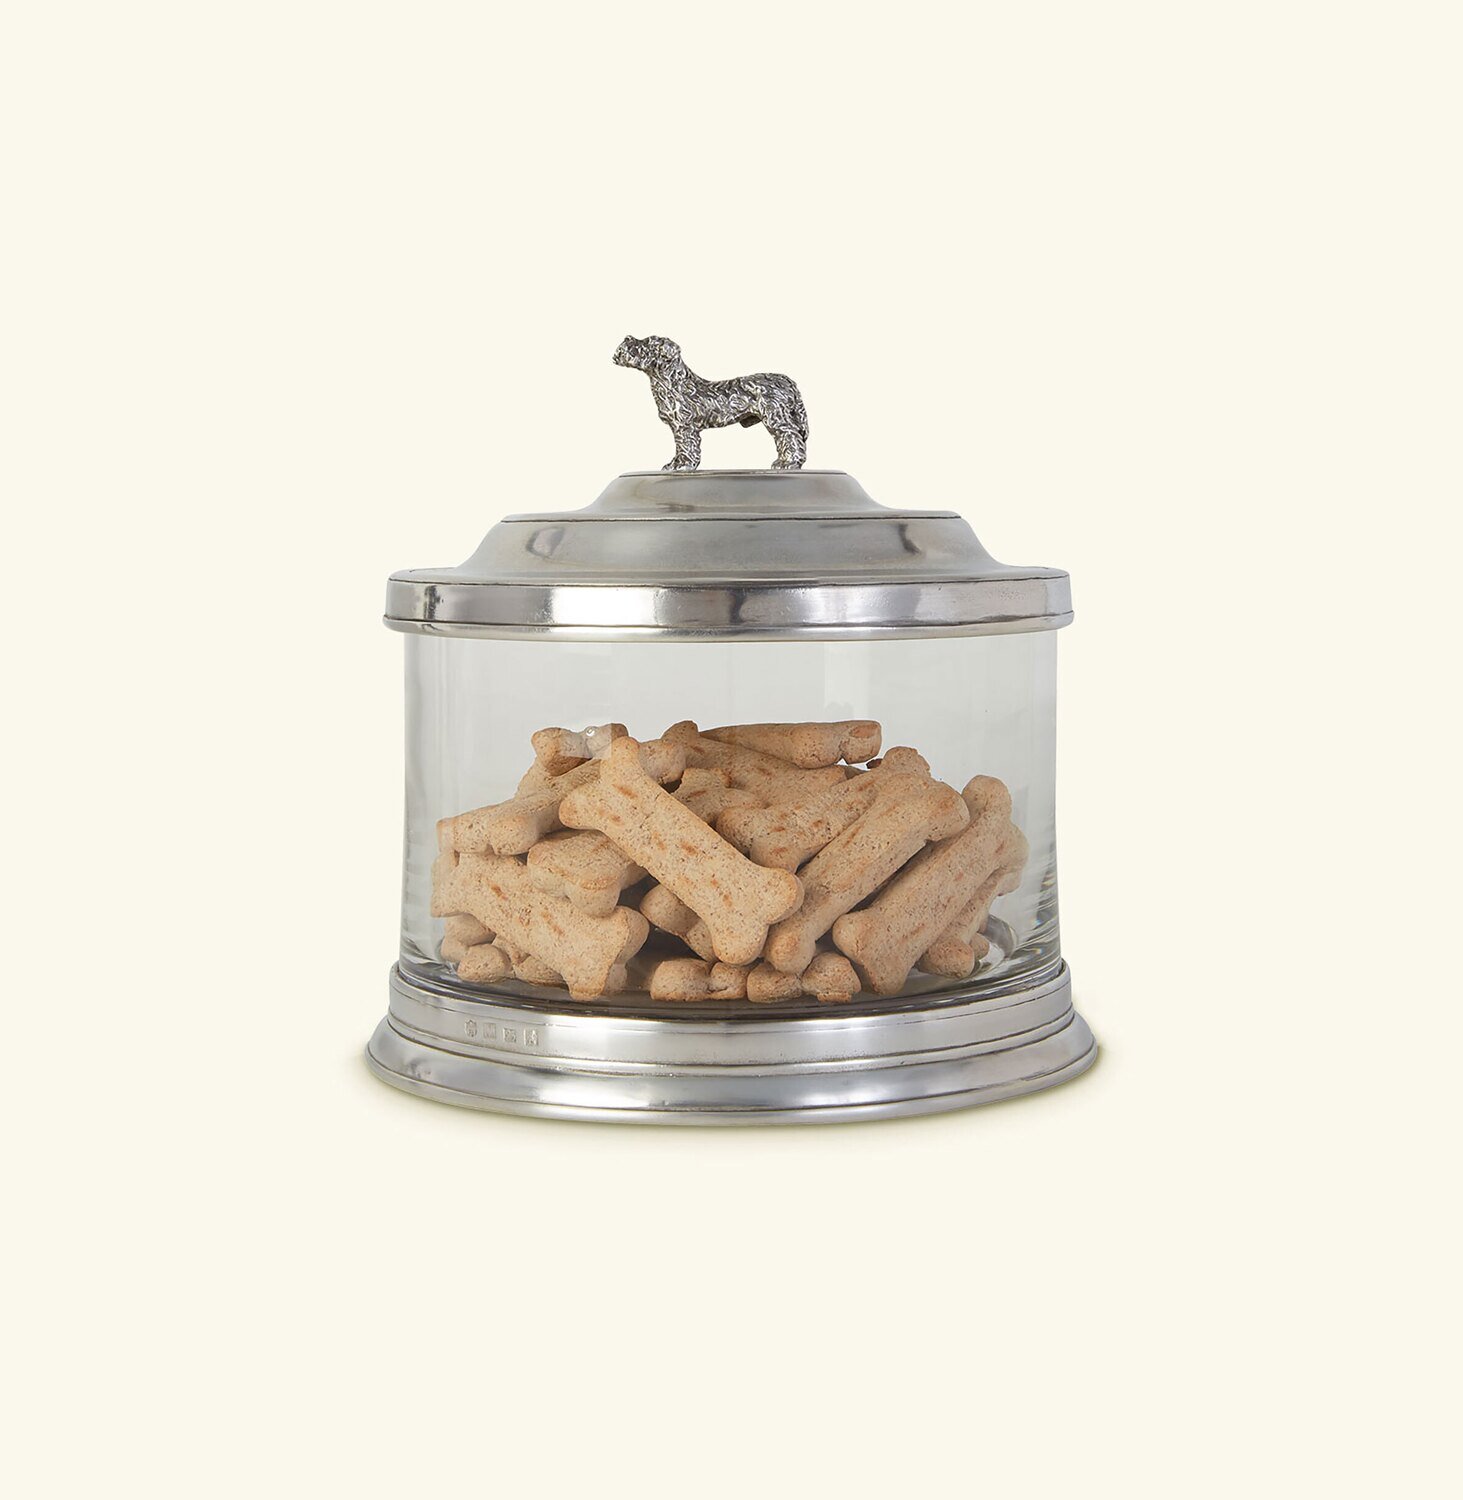 Match Pewter Glass Cookie Jar with Dog Finial 1301